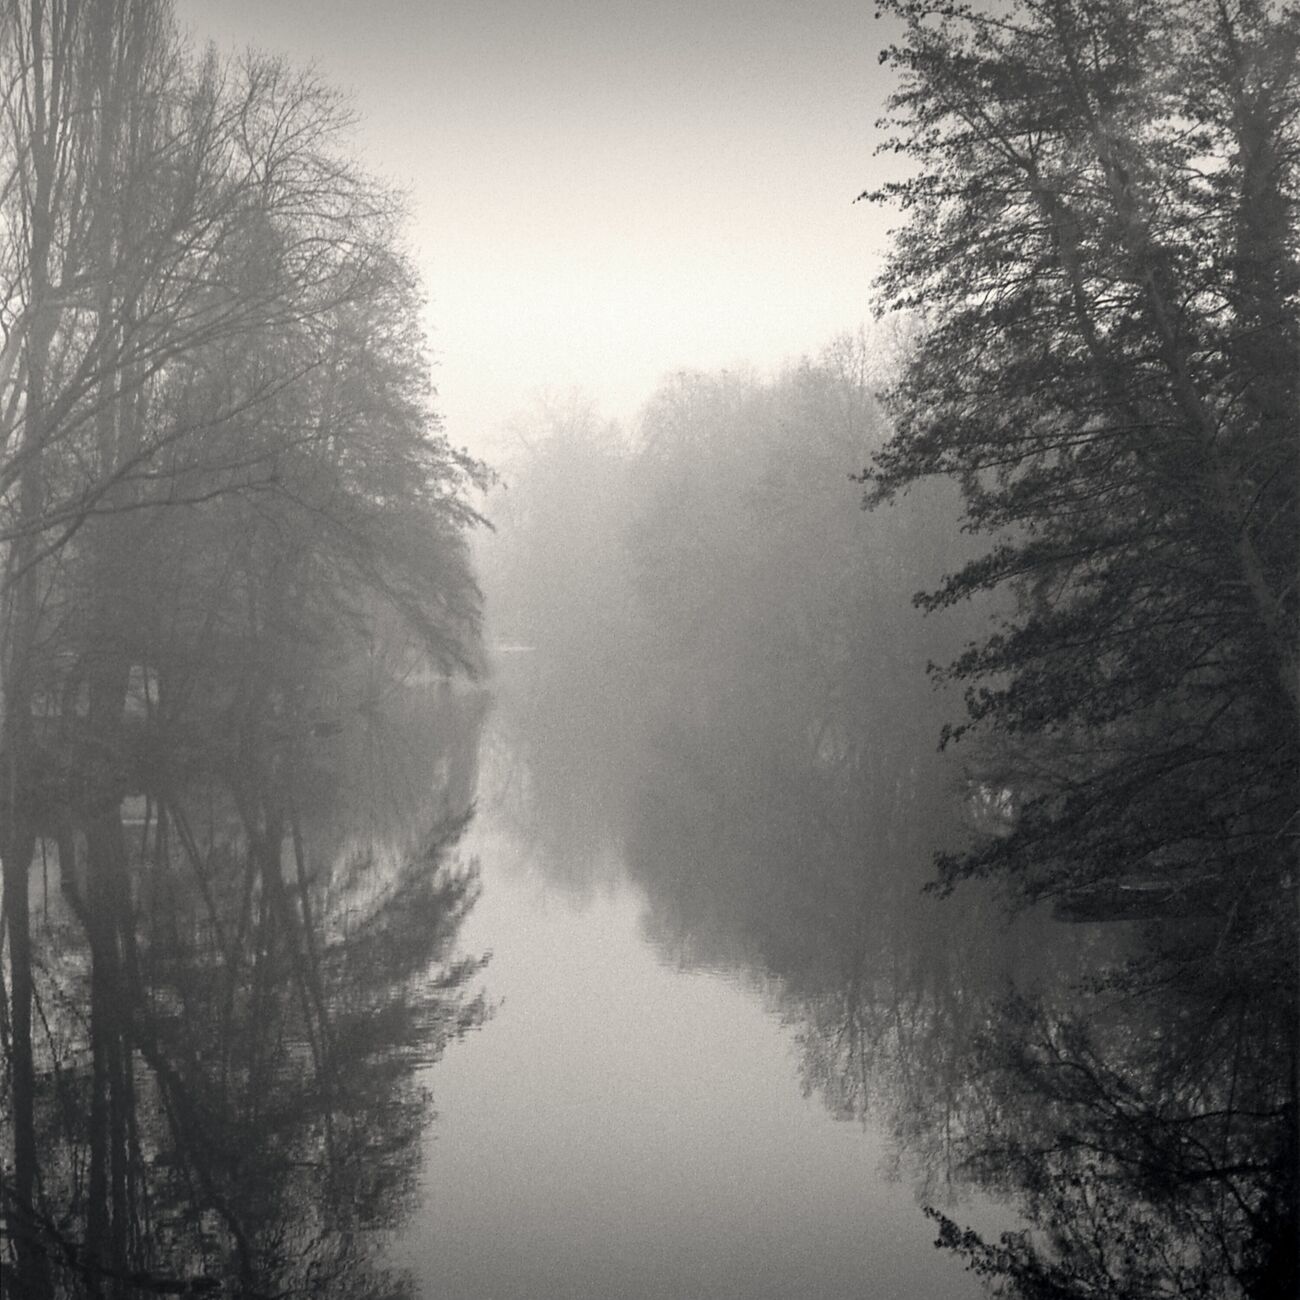 Dawn On Clain River, Poitiers, France. December 1989. Ref-911 - Denis Olivier Photography